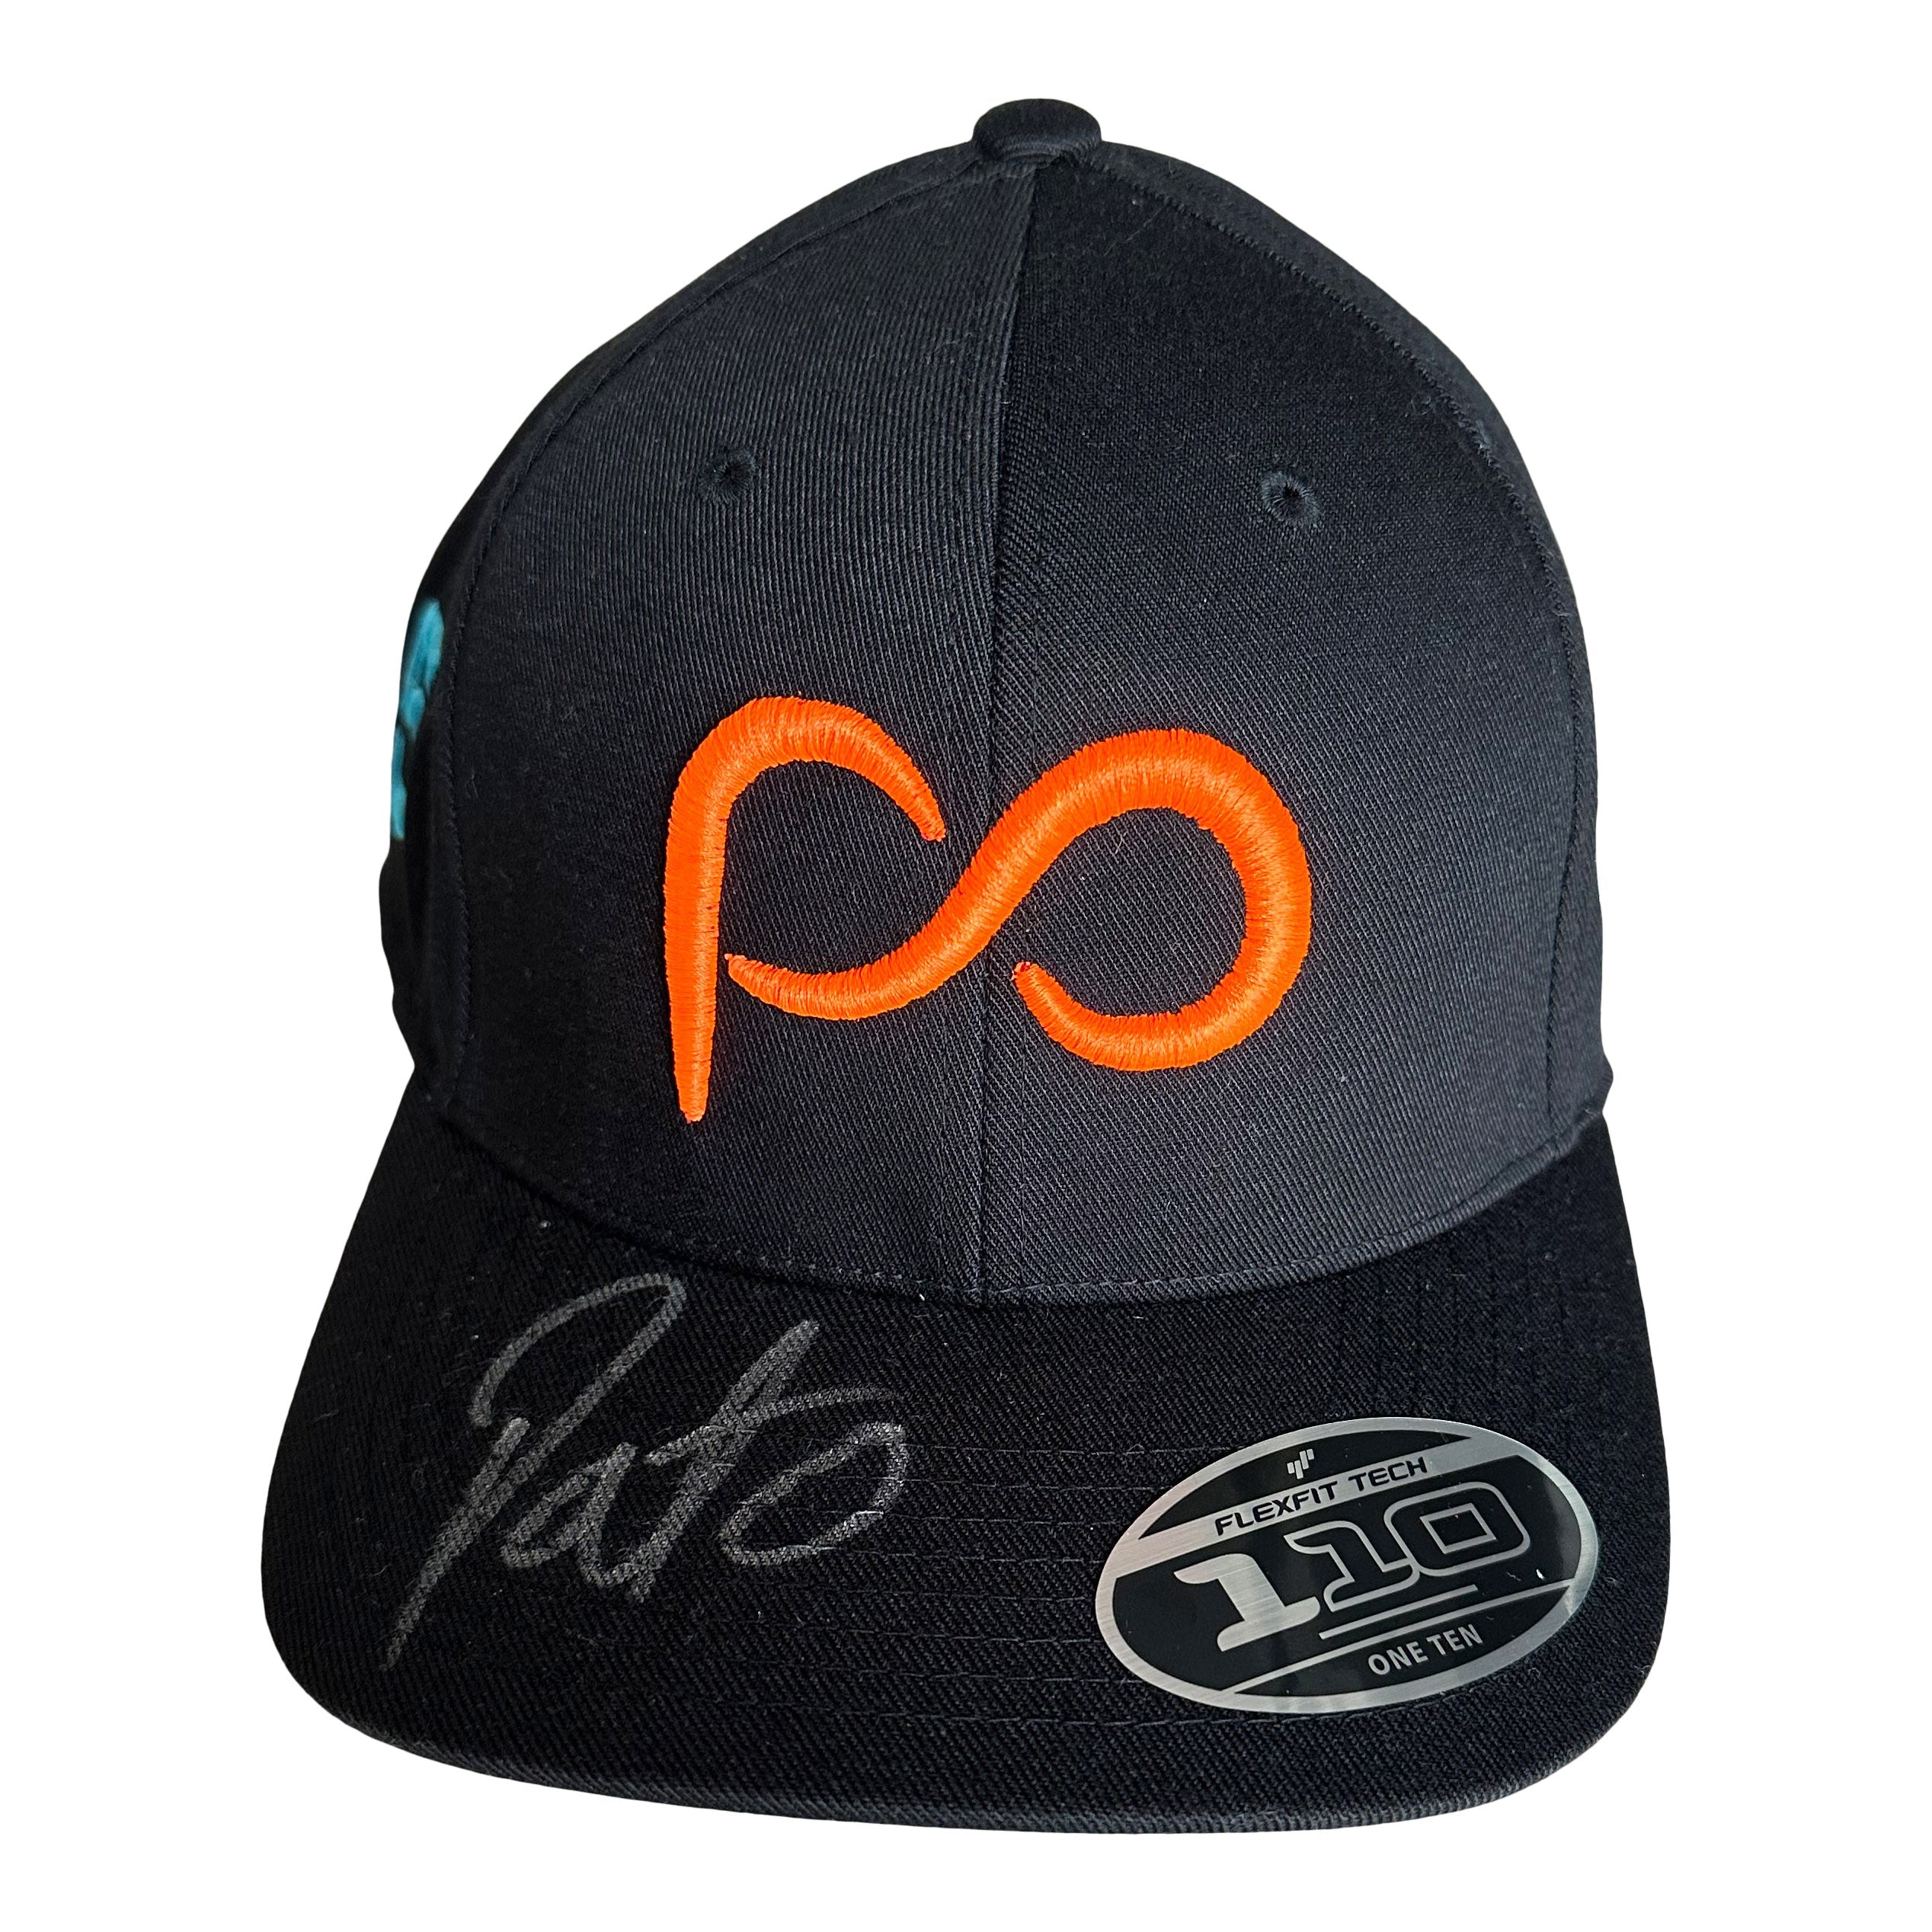 *Autographed* Black Flat Bill Cap with PO Neon 3D logo in front and #5 blue on side